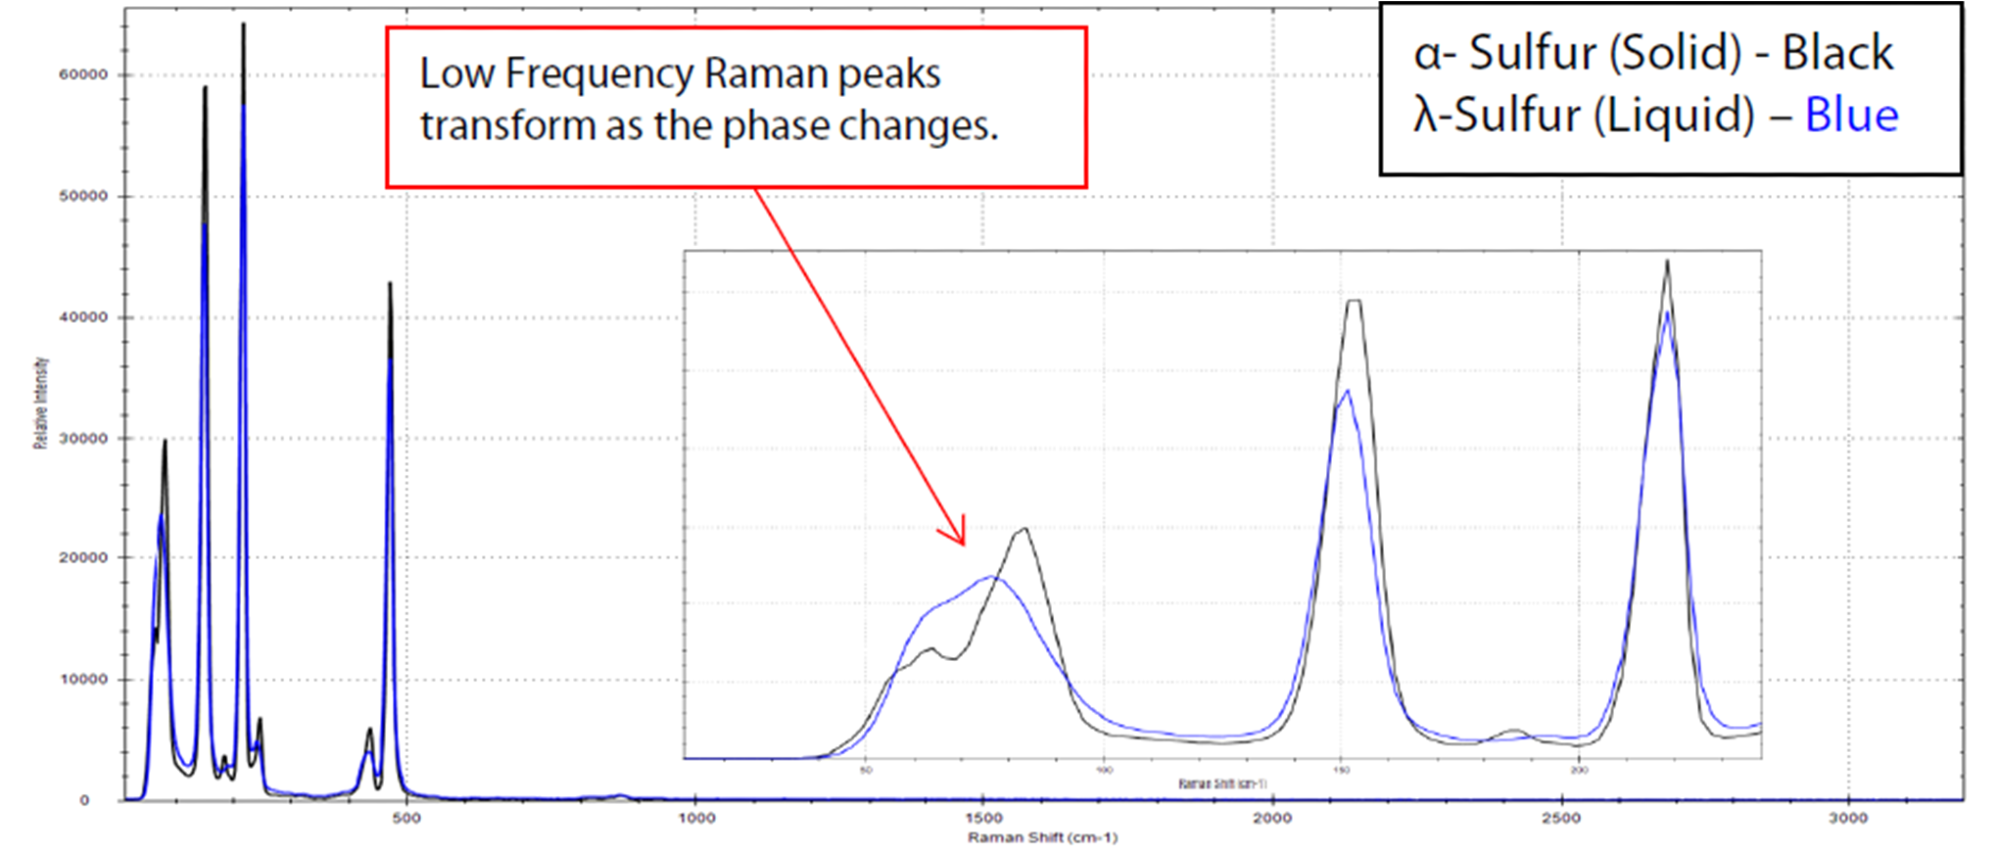 Raman spectra of sulfur transitioning from the a-crystalline form to the ?-liquid form, taken with 0.1 s integration time